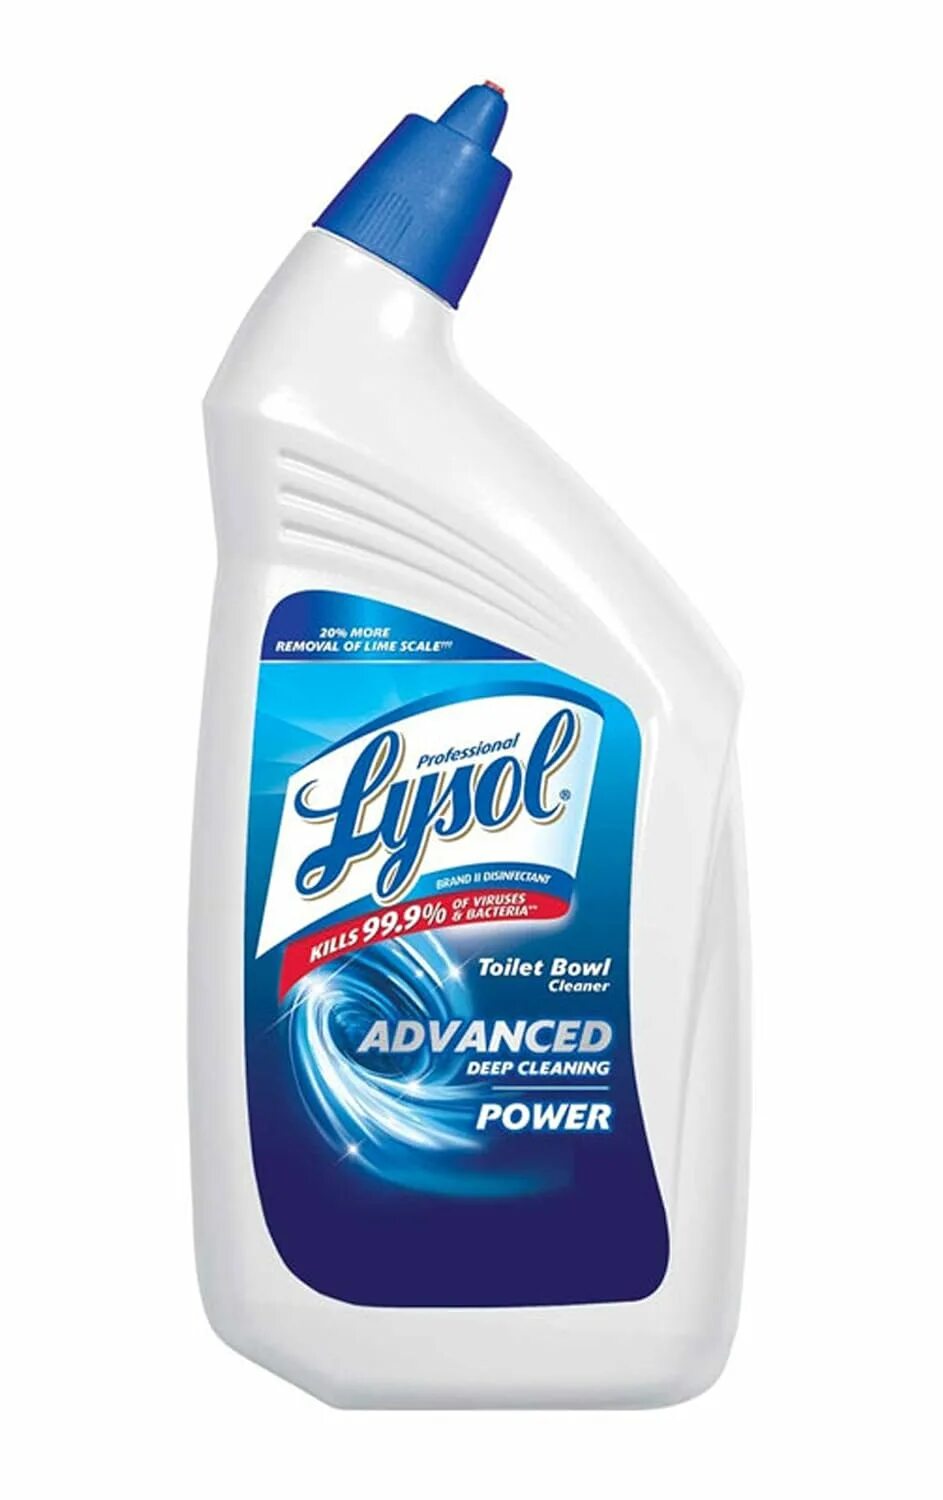 Cleaning completed. Toilet Cleaner. Лизол 10%. Lysol бутылка. Lysol для туалета.